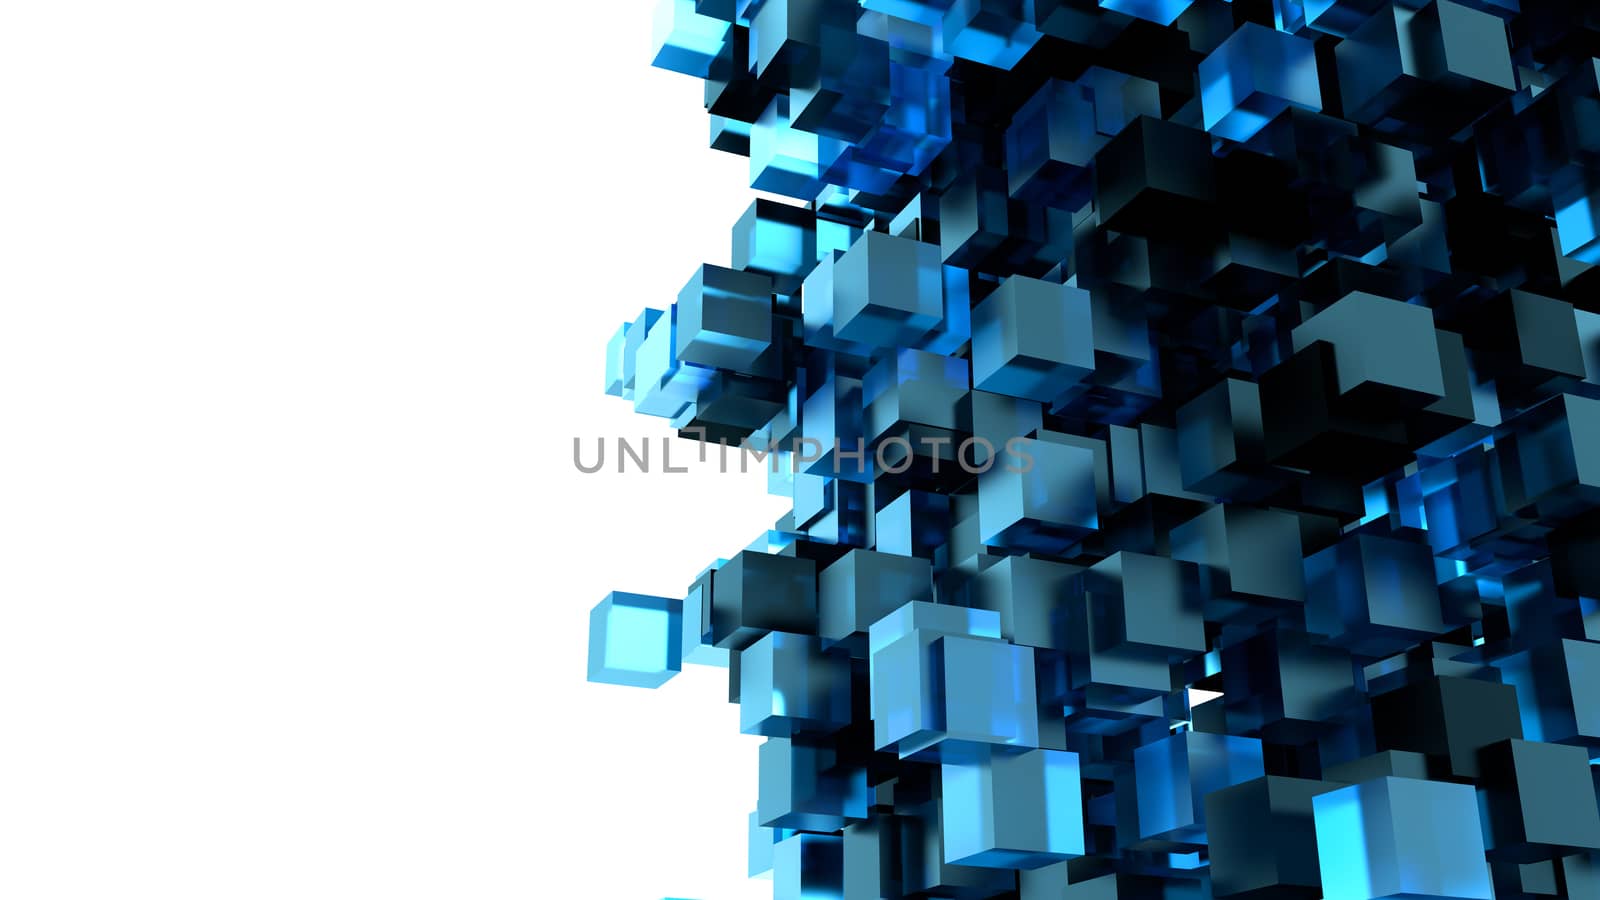 Abstract Image Of Cubes Background In Blue Toned. Template For Your Technology Design. 3D Illustration